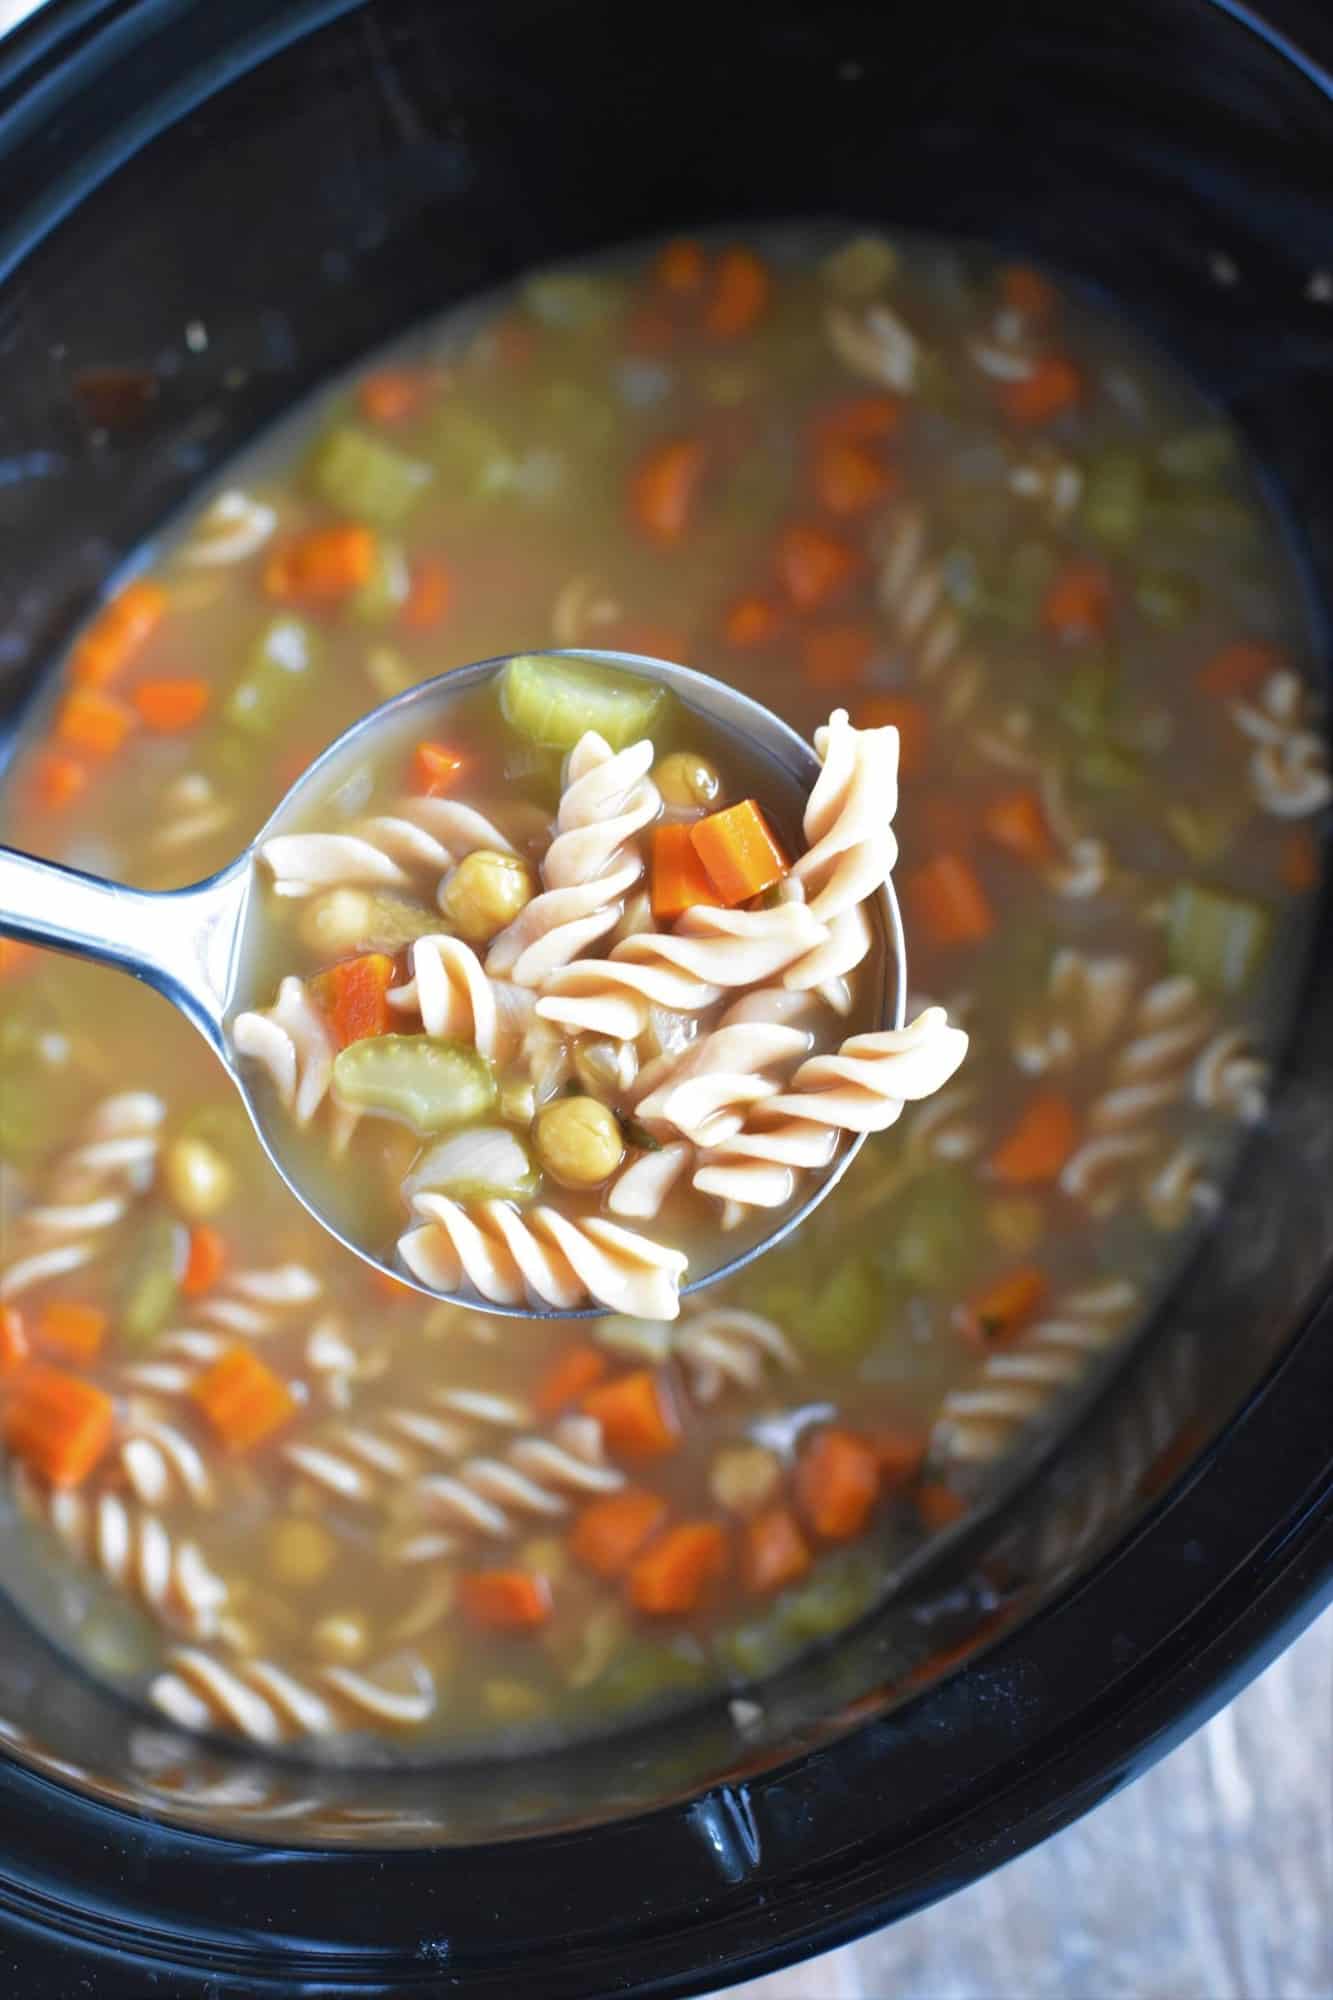 holding scoop of soup in a ladle over the slow cooker